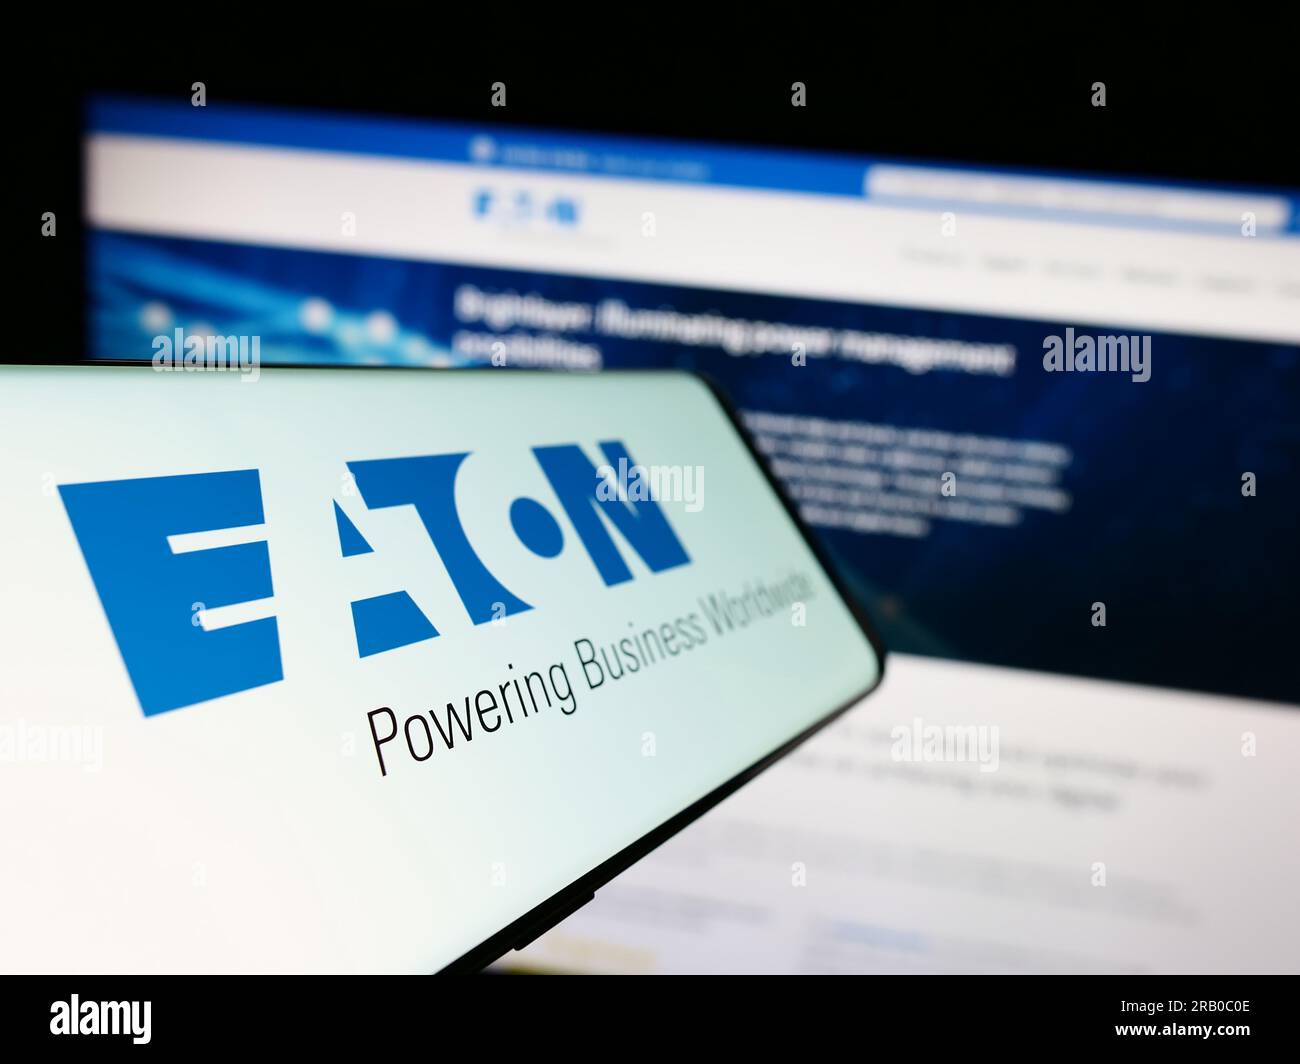 Mobile phone with logo of power management company Eaton Corporation plc on screen in front of business website. Focus on left of phone display. Stock Photo